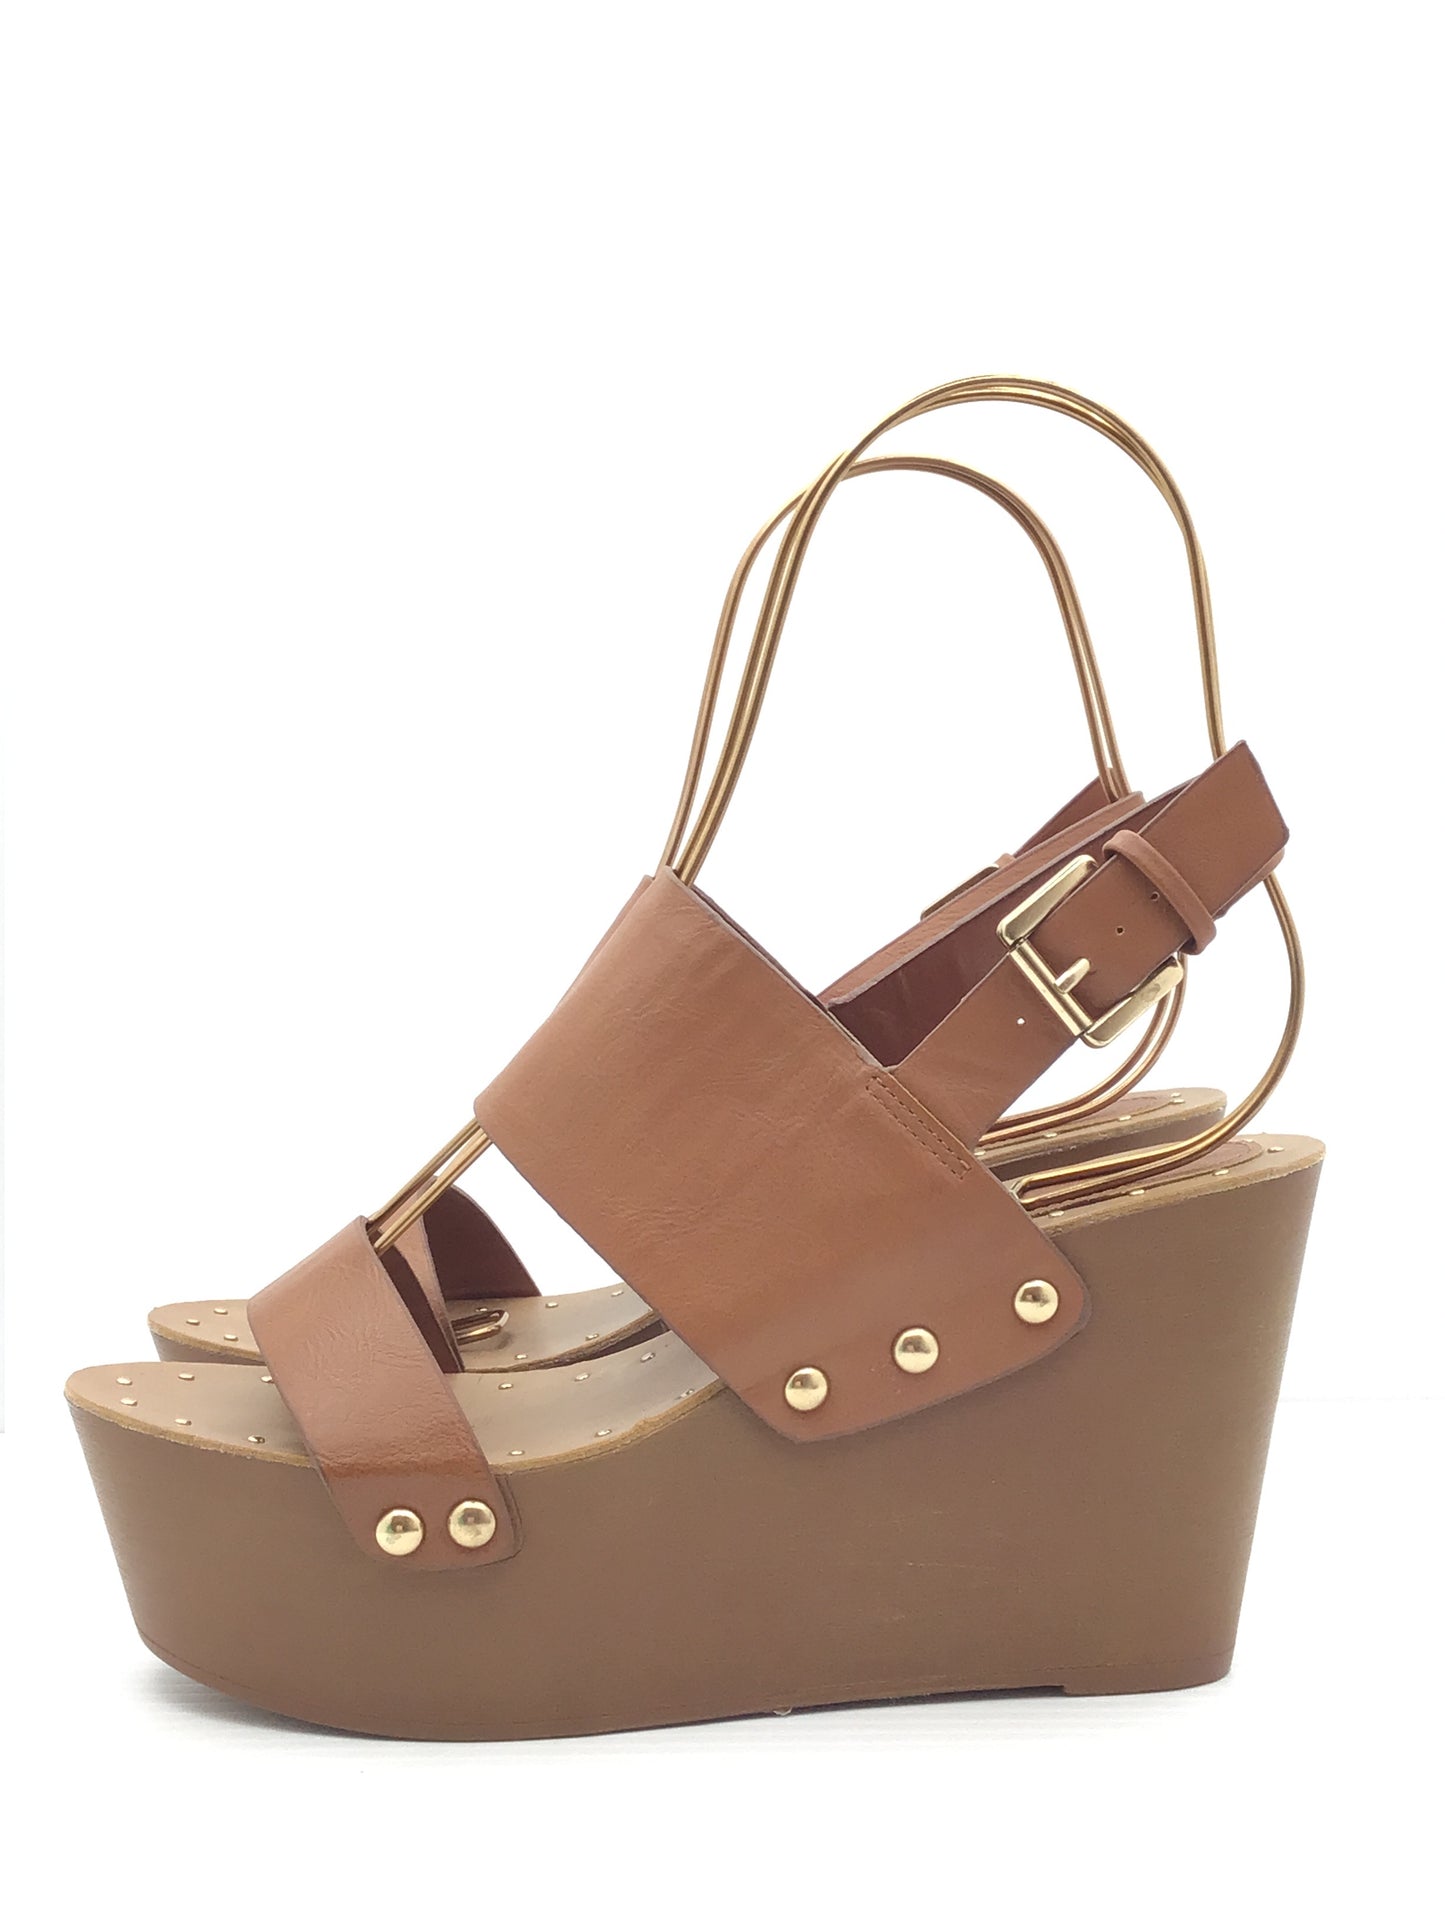 Sandals Heels Wedge By Forever 21  Size: 7.5